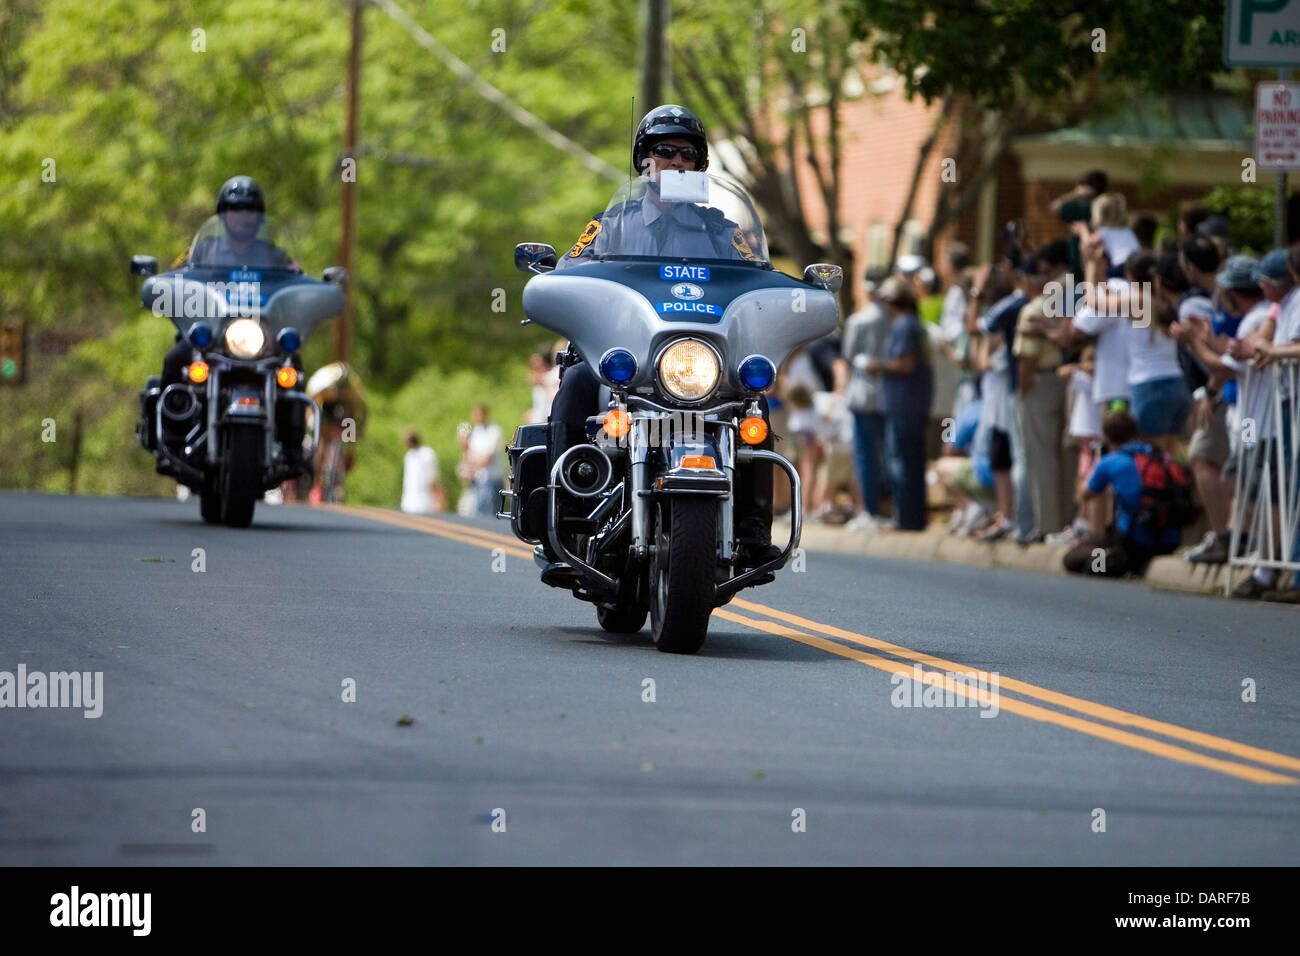 Two Virginia state police motorcycle officers ride in front of the Tour of Virginia cycling race, Charlottesville, Virginia Stock Photo